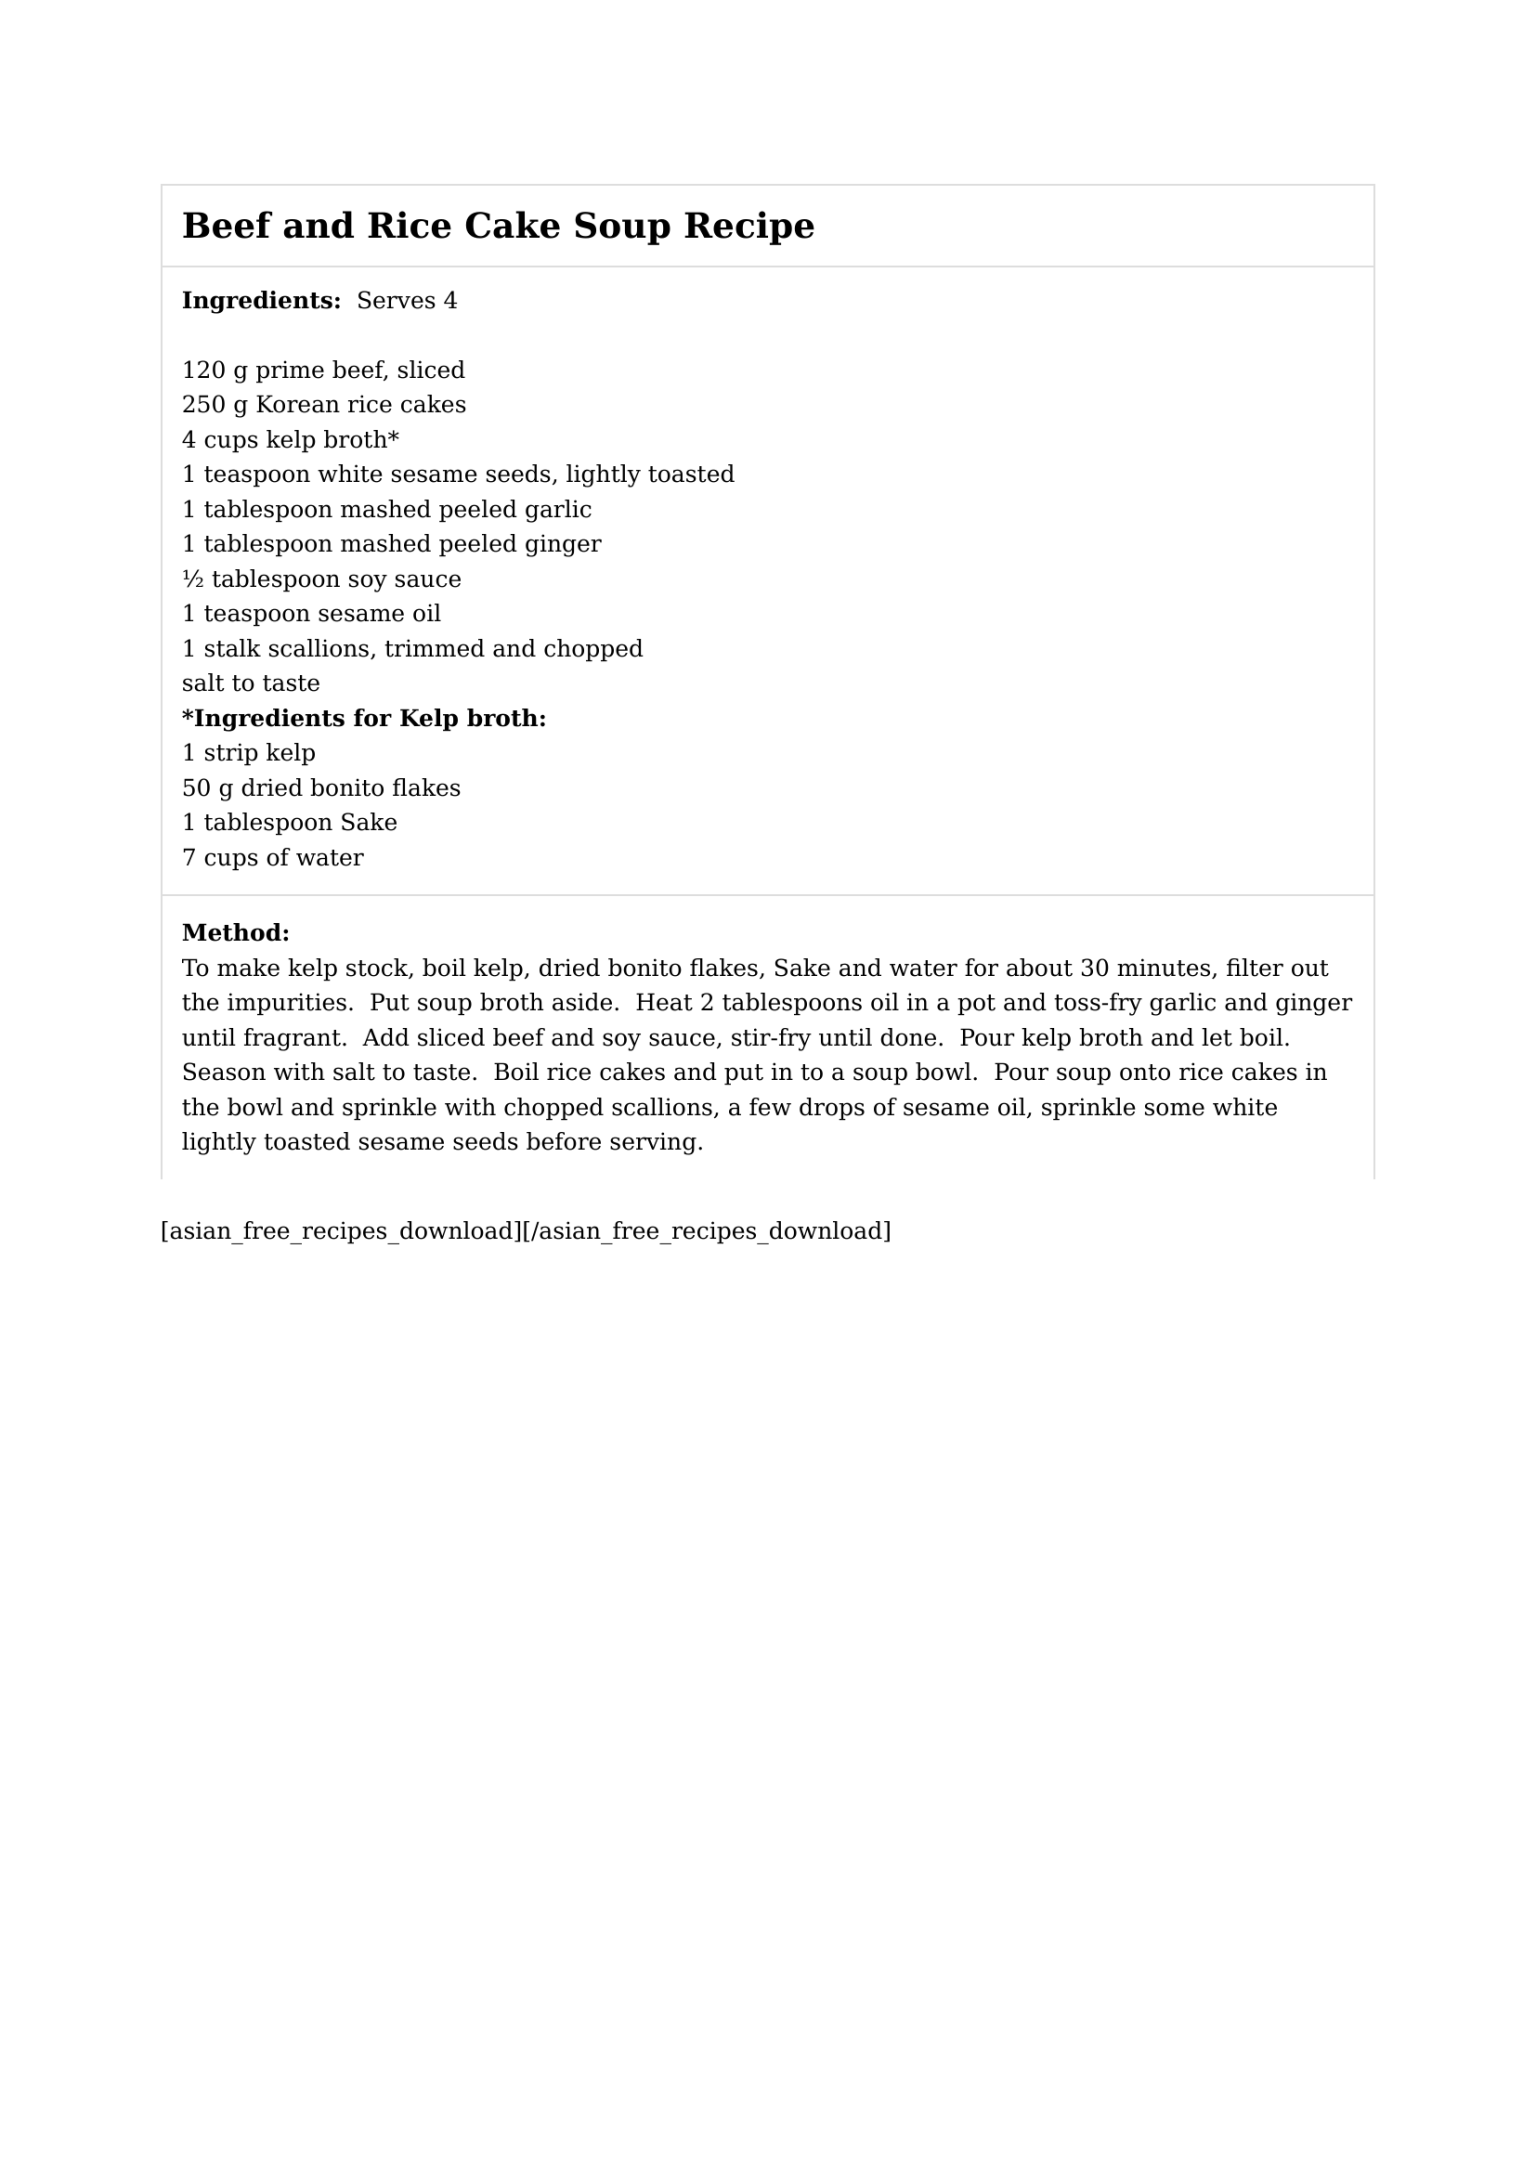 Beef and Rice Cake Soup Recipe